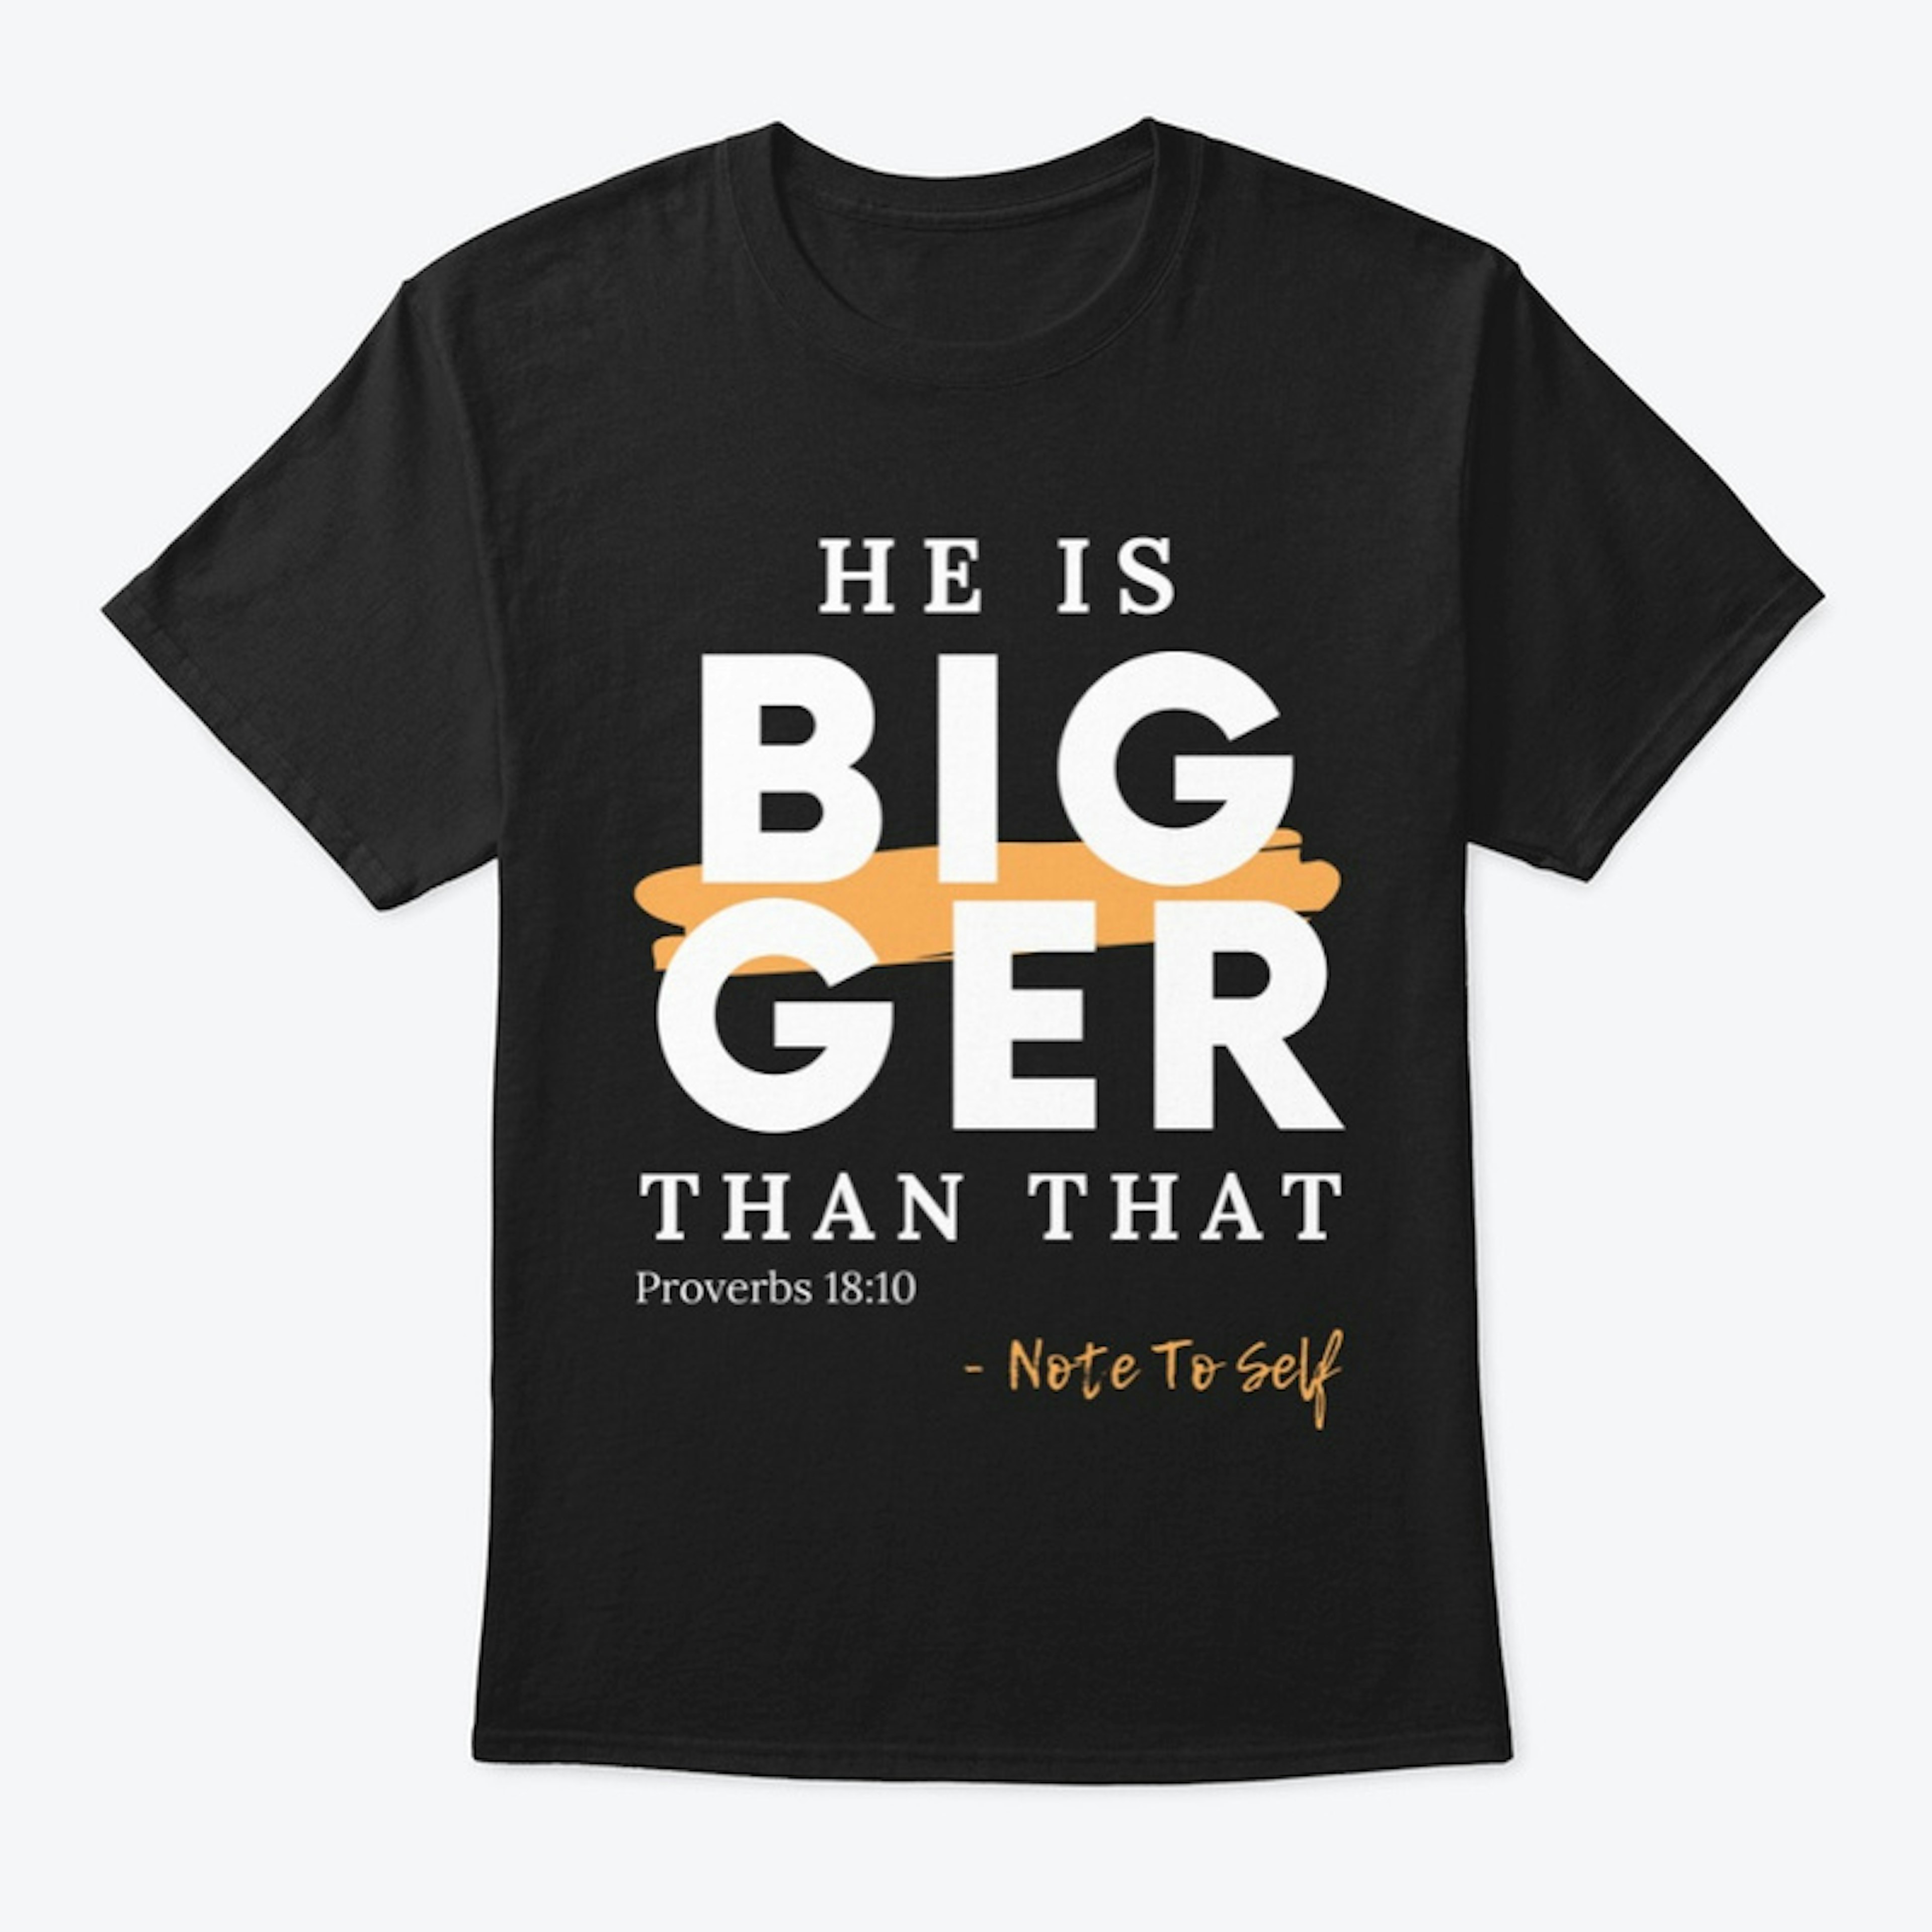 He is Bigger Than That - Proverbs 18:10